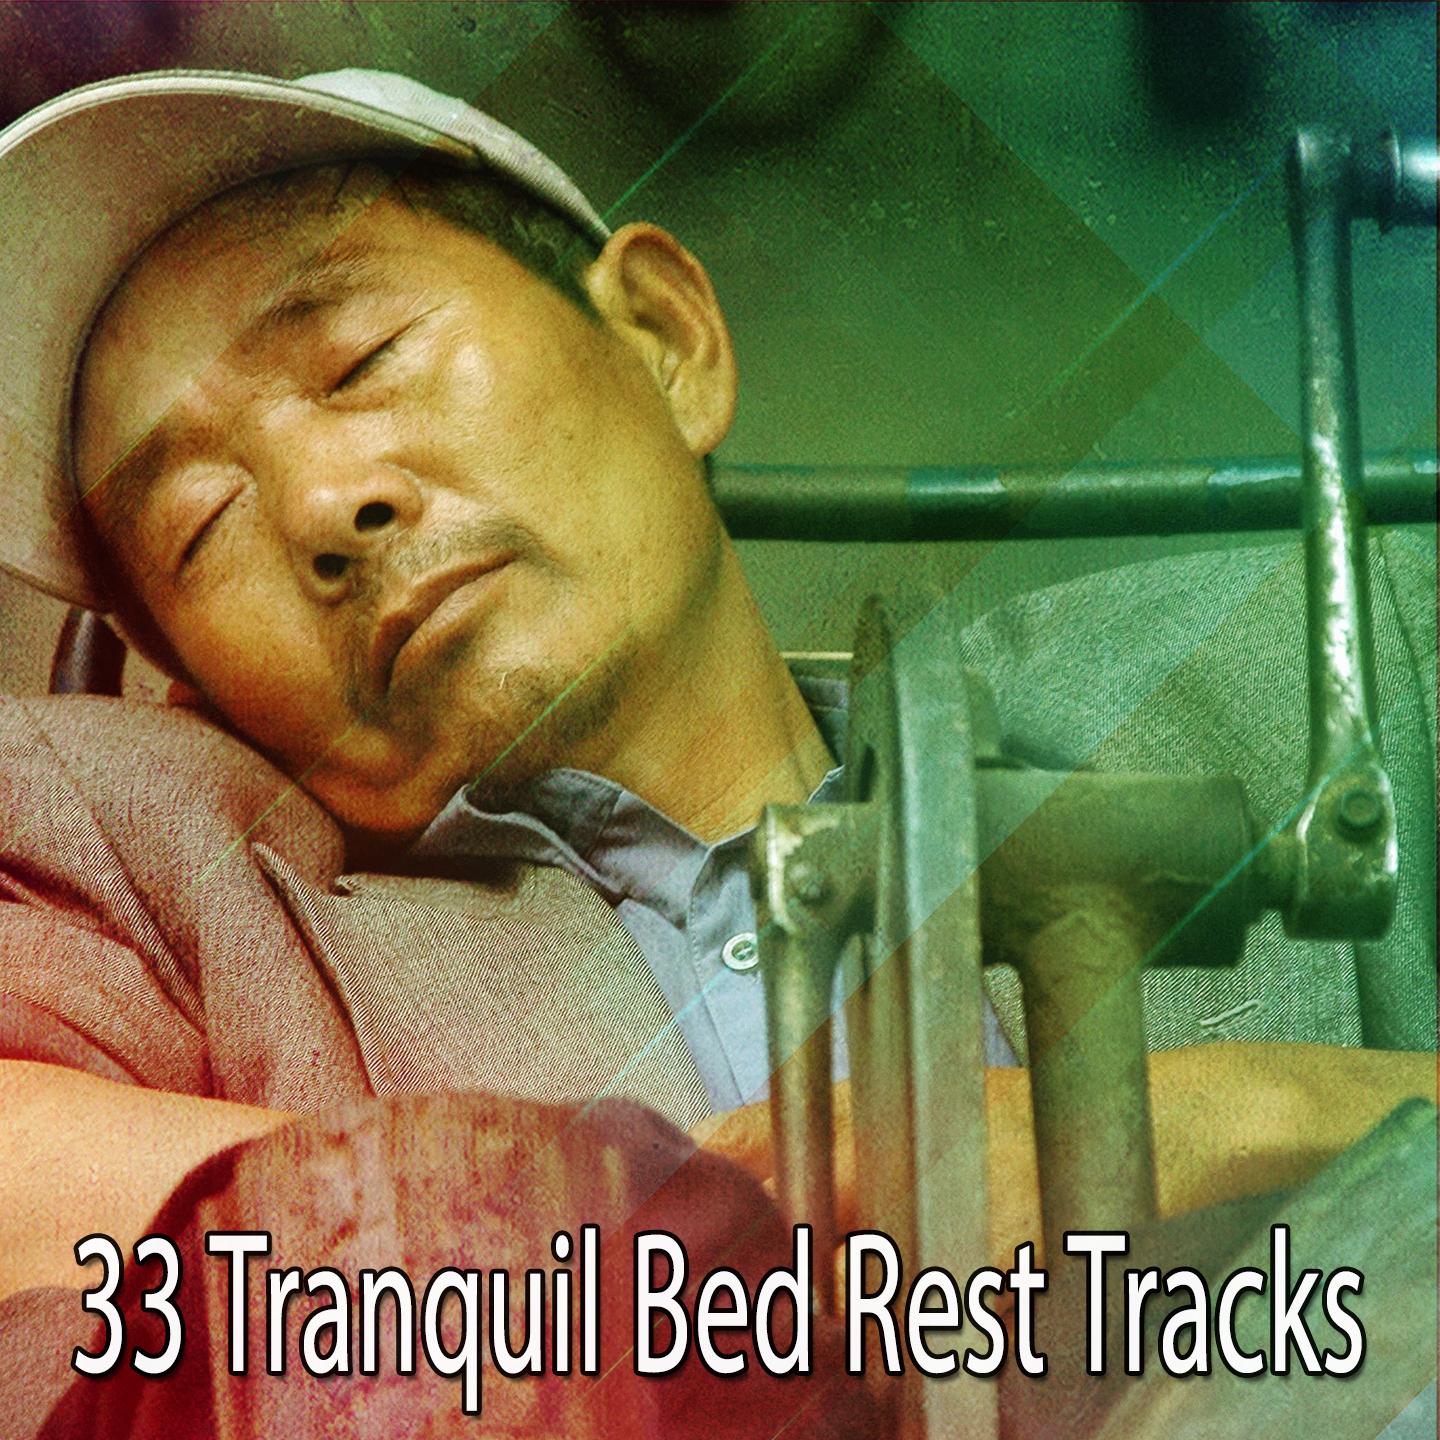 33 Tranquil Bed Rest Tracks